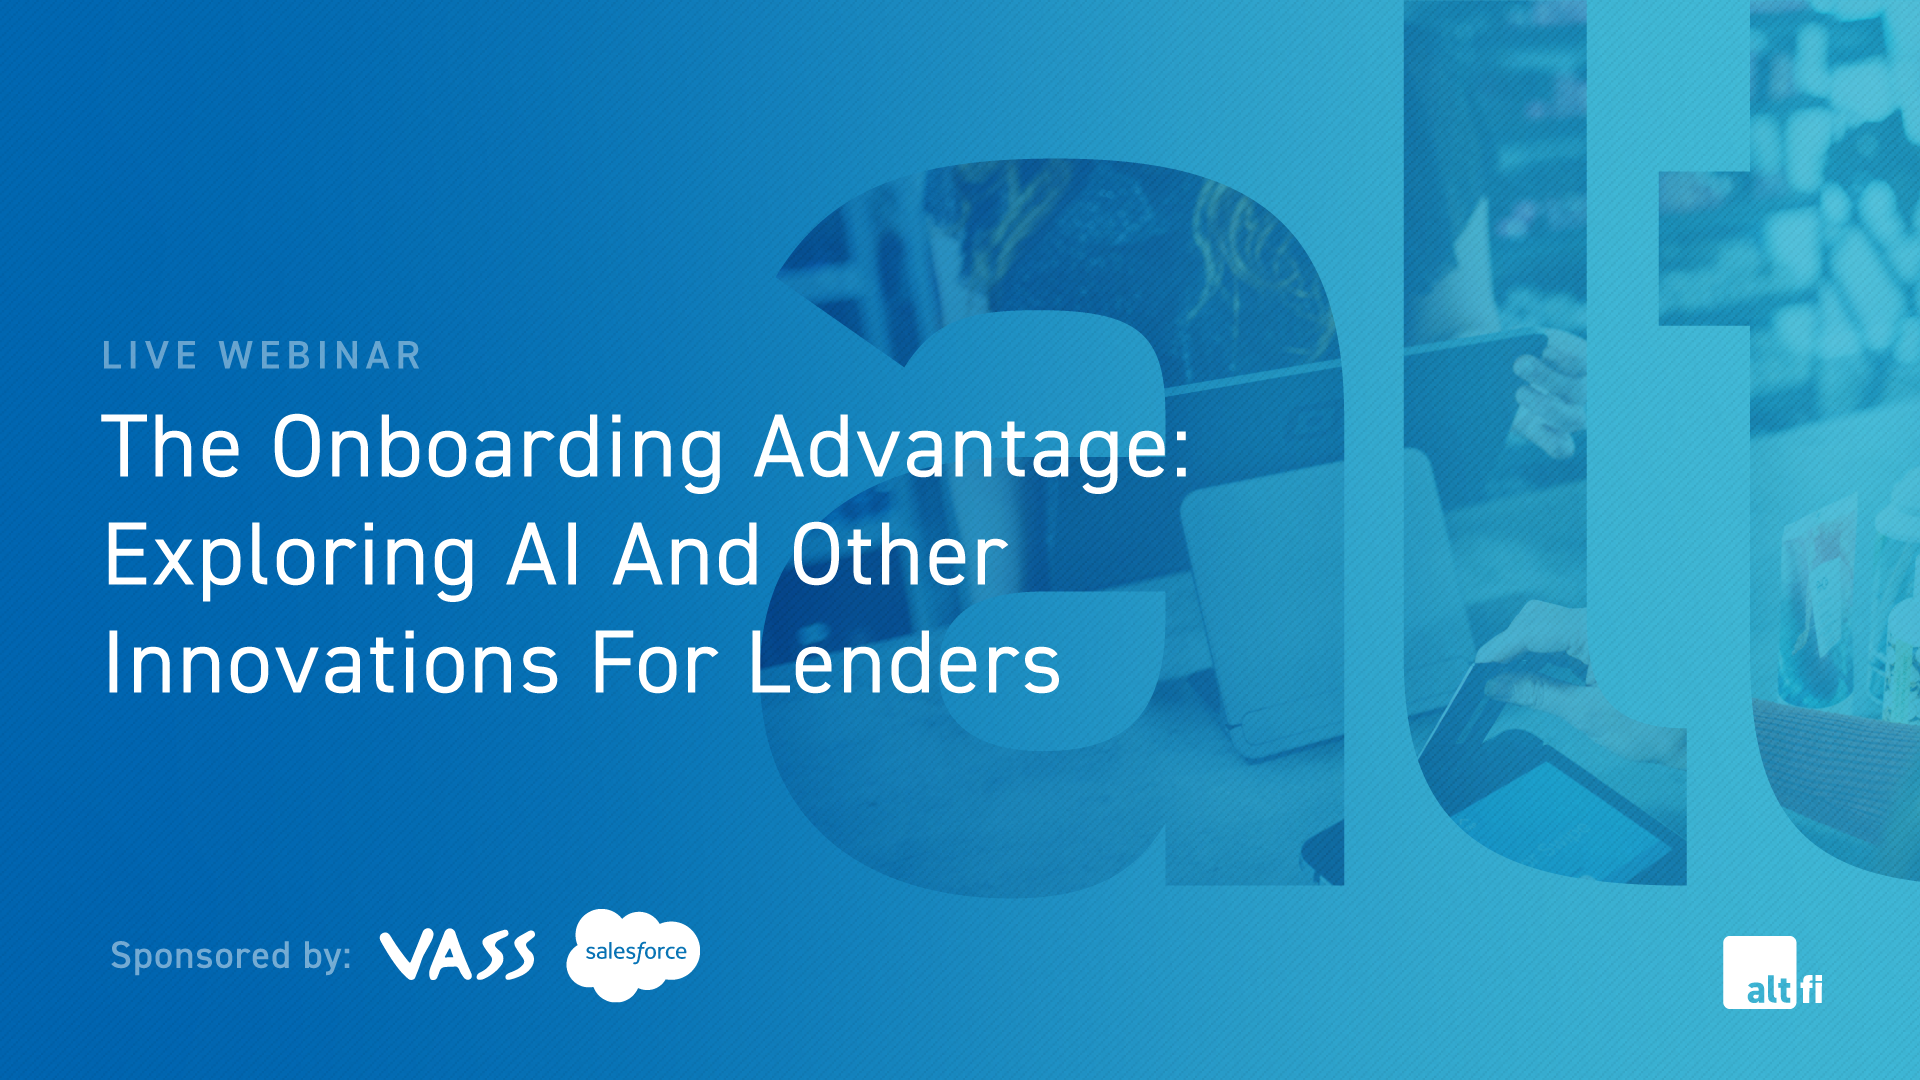 The Onboarding Advantage: Exploring AI And Other Innovations For Lenders